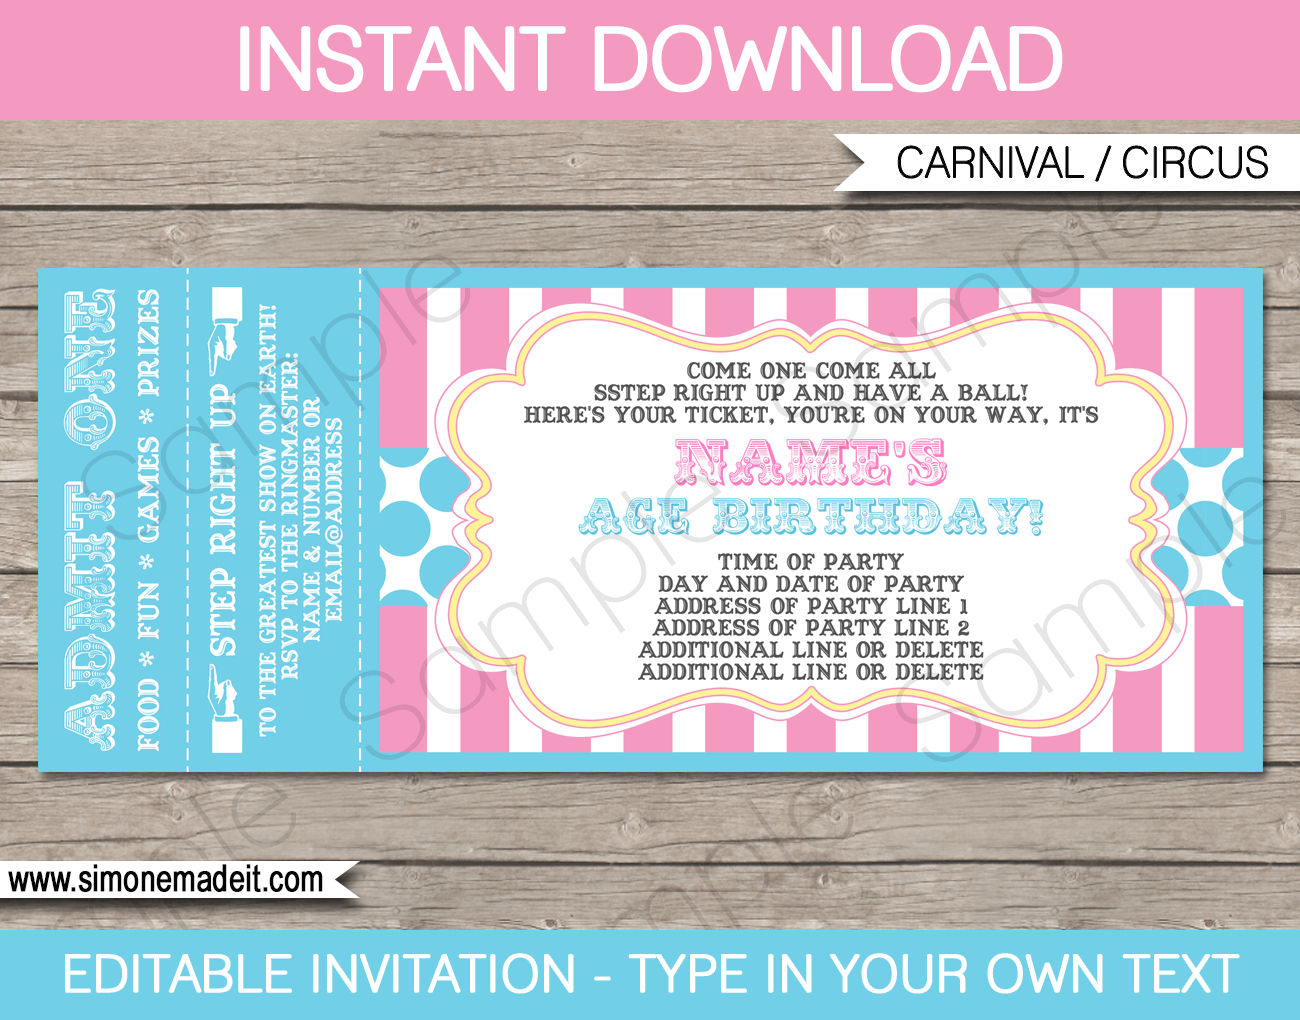 Carnival Party Ticket Invitations Template Carnival Or Circus within sizing 1300 X 1020